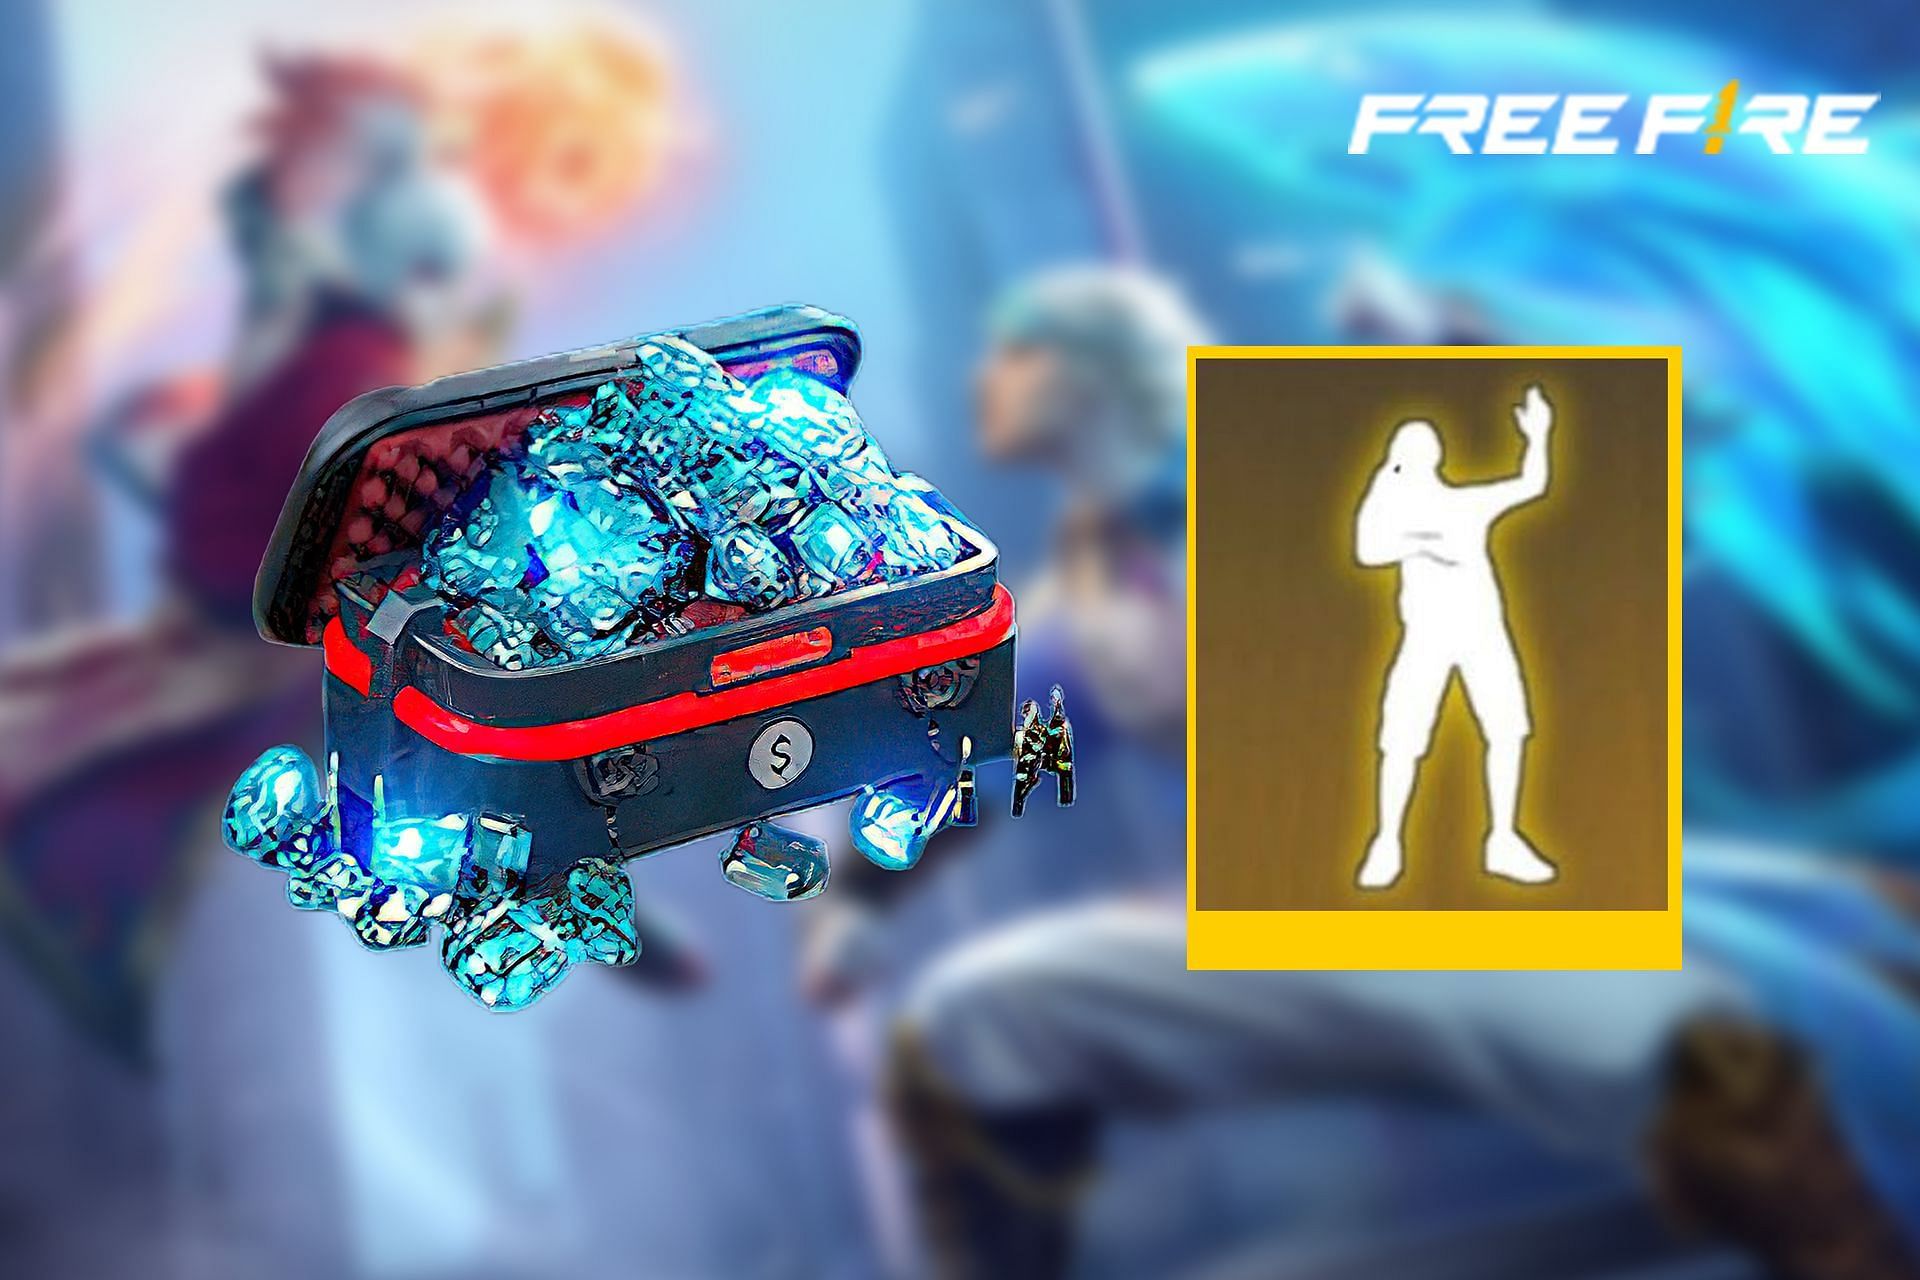 How to purchase Free Fire MAX diamonds and get free emote